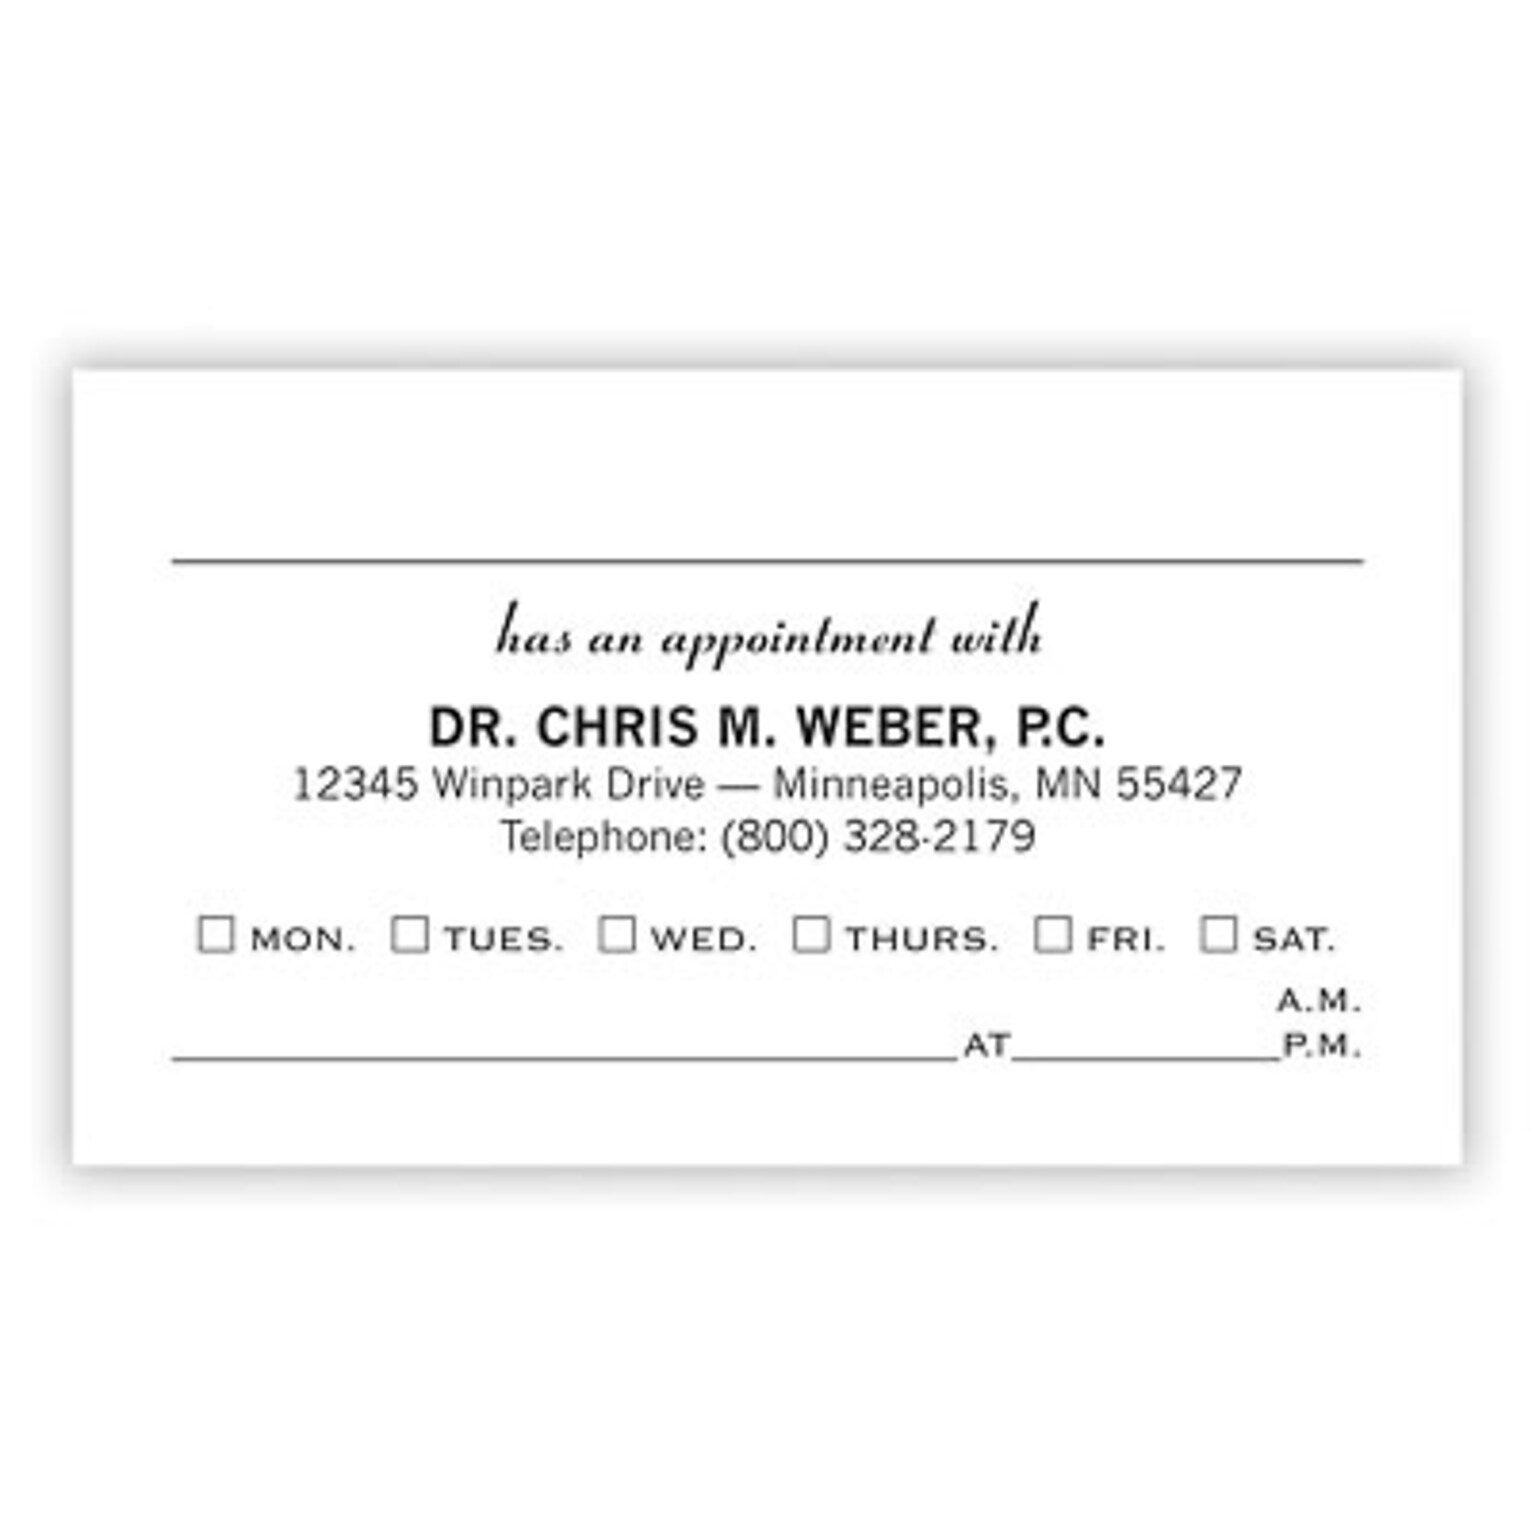 Custom 1-2 Color Appointment Cards, CLASSIC® Linen Haviland Blue 80#, Raised Print, 1 Standard Ink, 1-Sided, 250/Pk